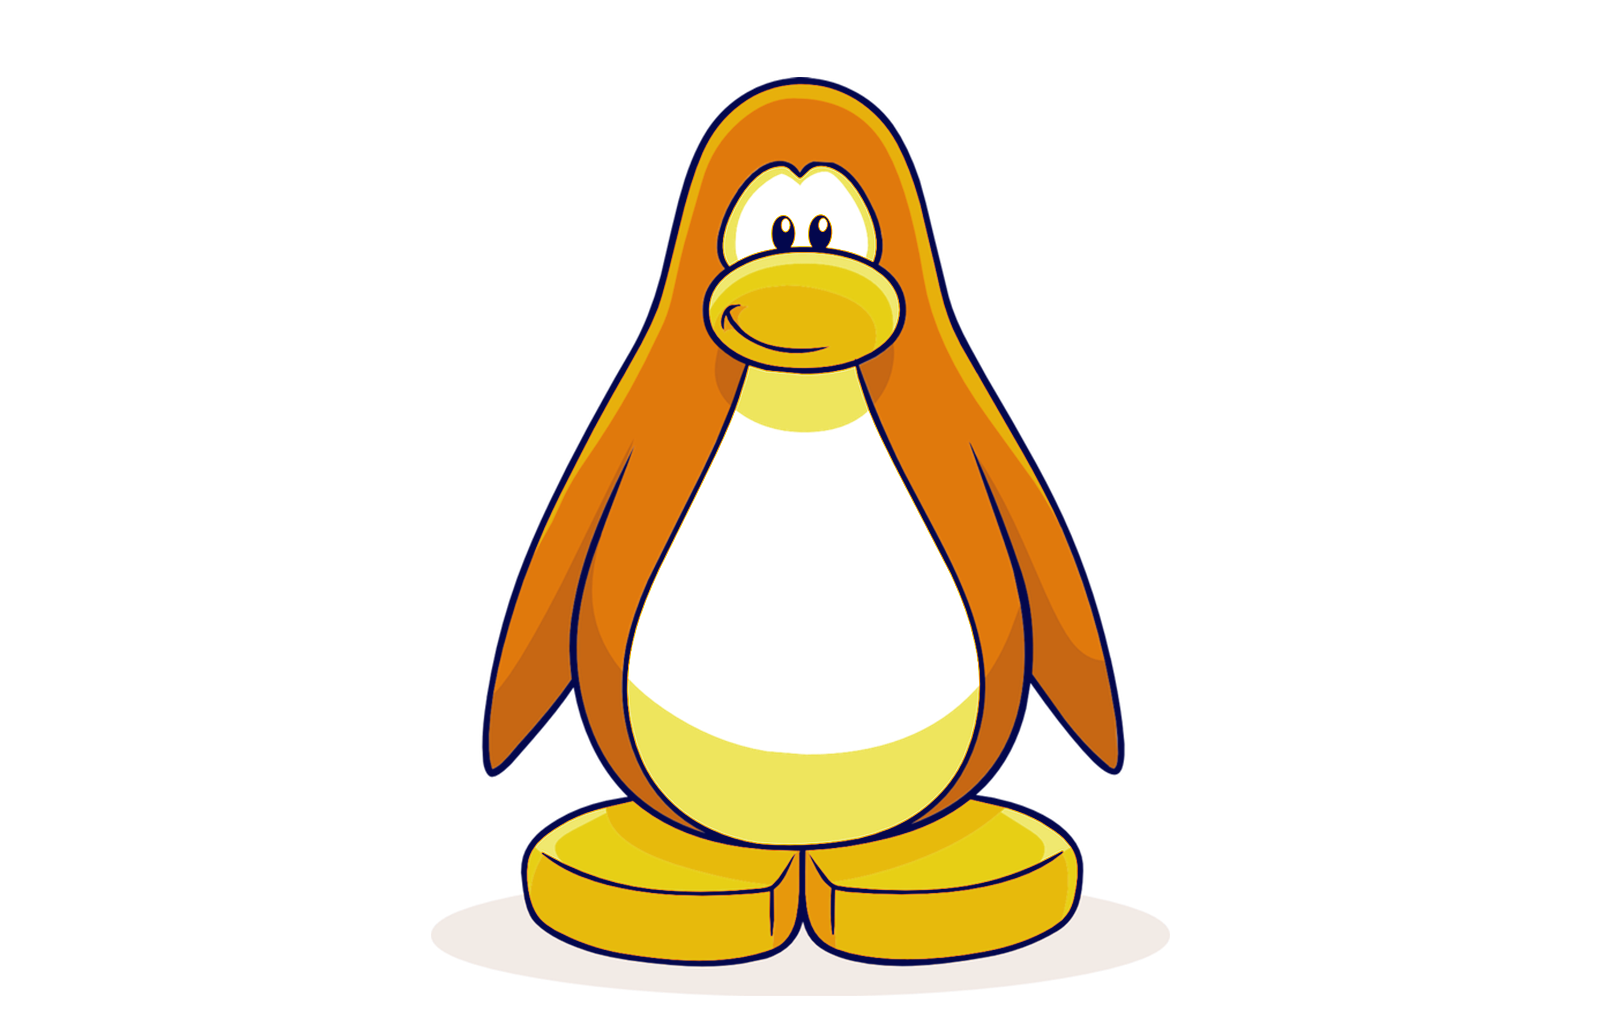 What's your favorite Club Penguin Design? And why? (1-4) : r/ClubPenguin